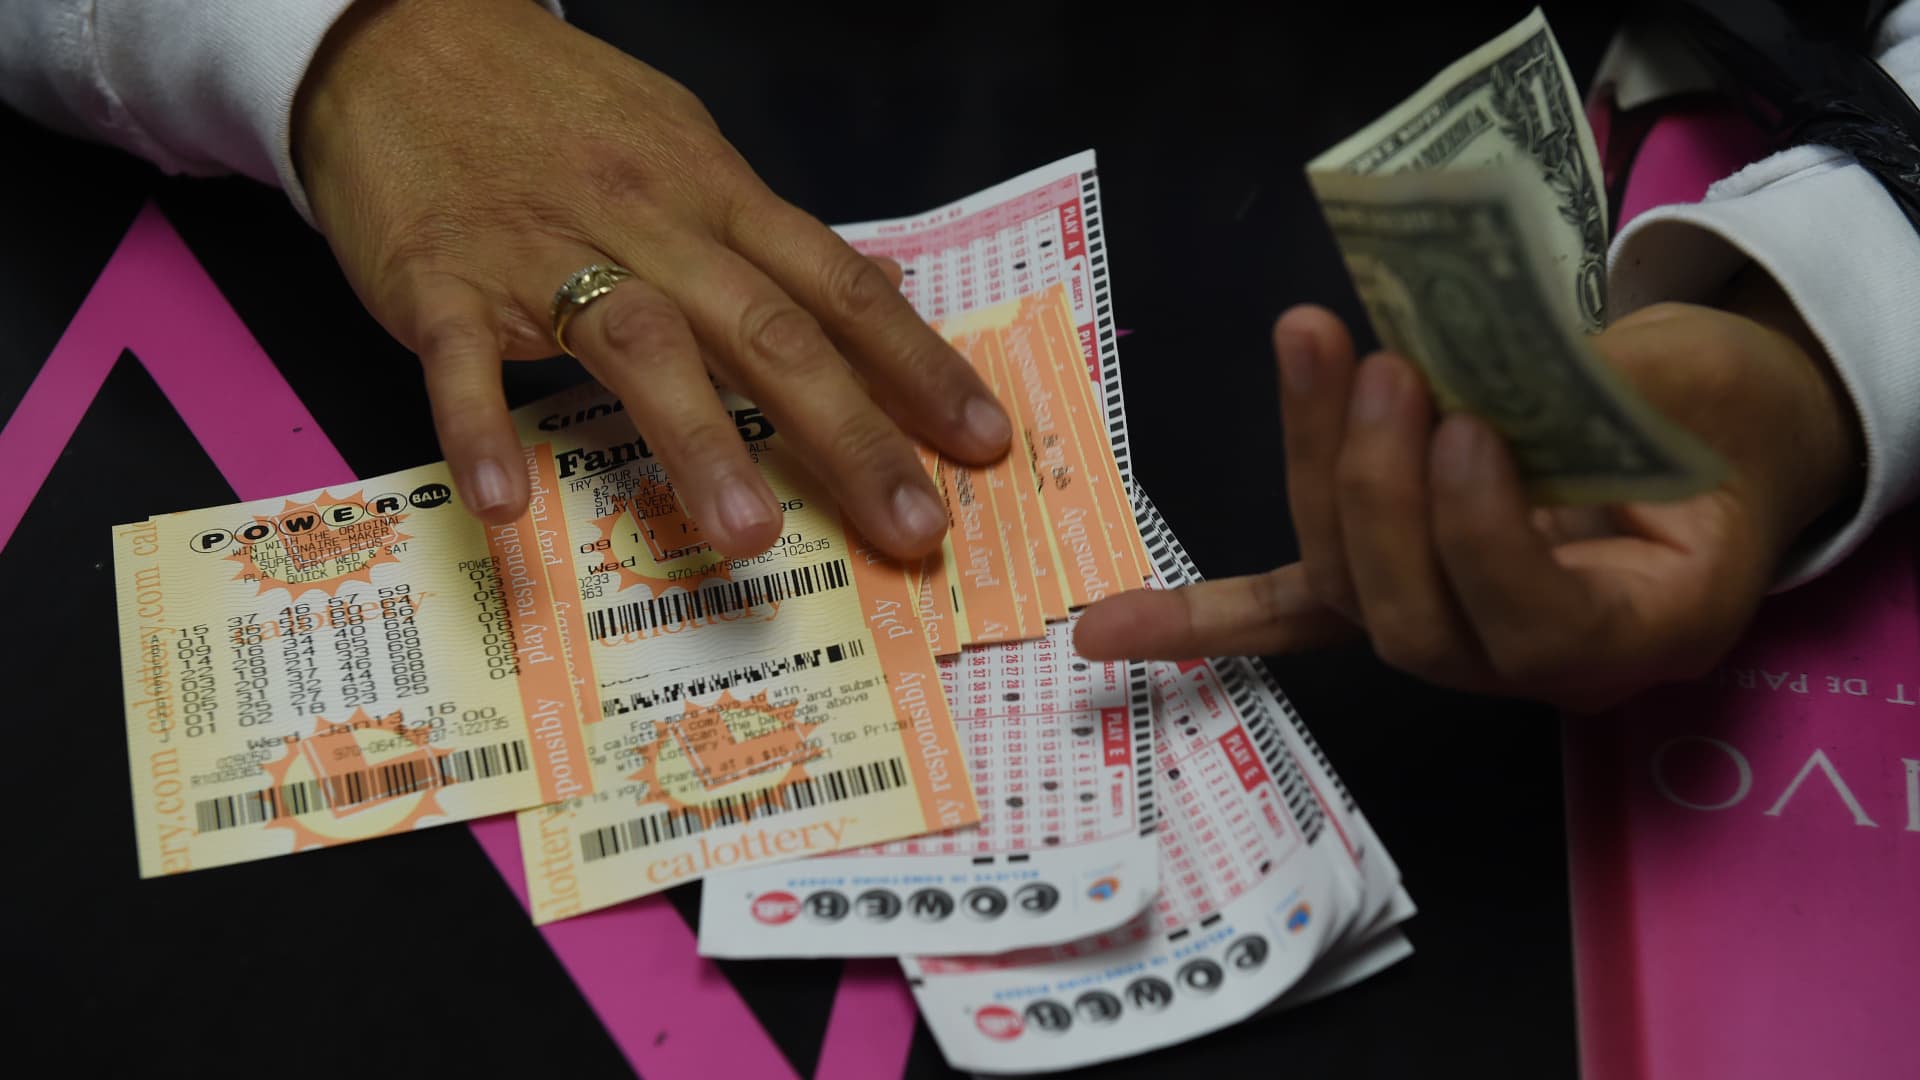 The $1.9 billion Powerball jackpot — the largest ever — is up for grabs. Here's the tax bill if there's a winner